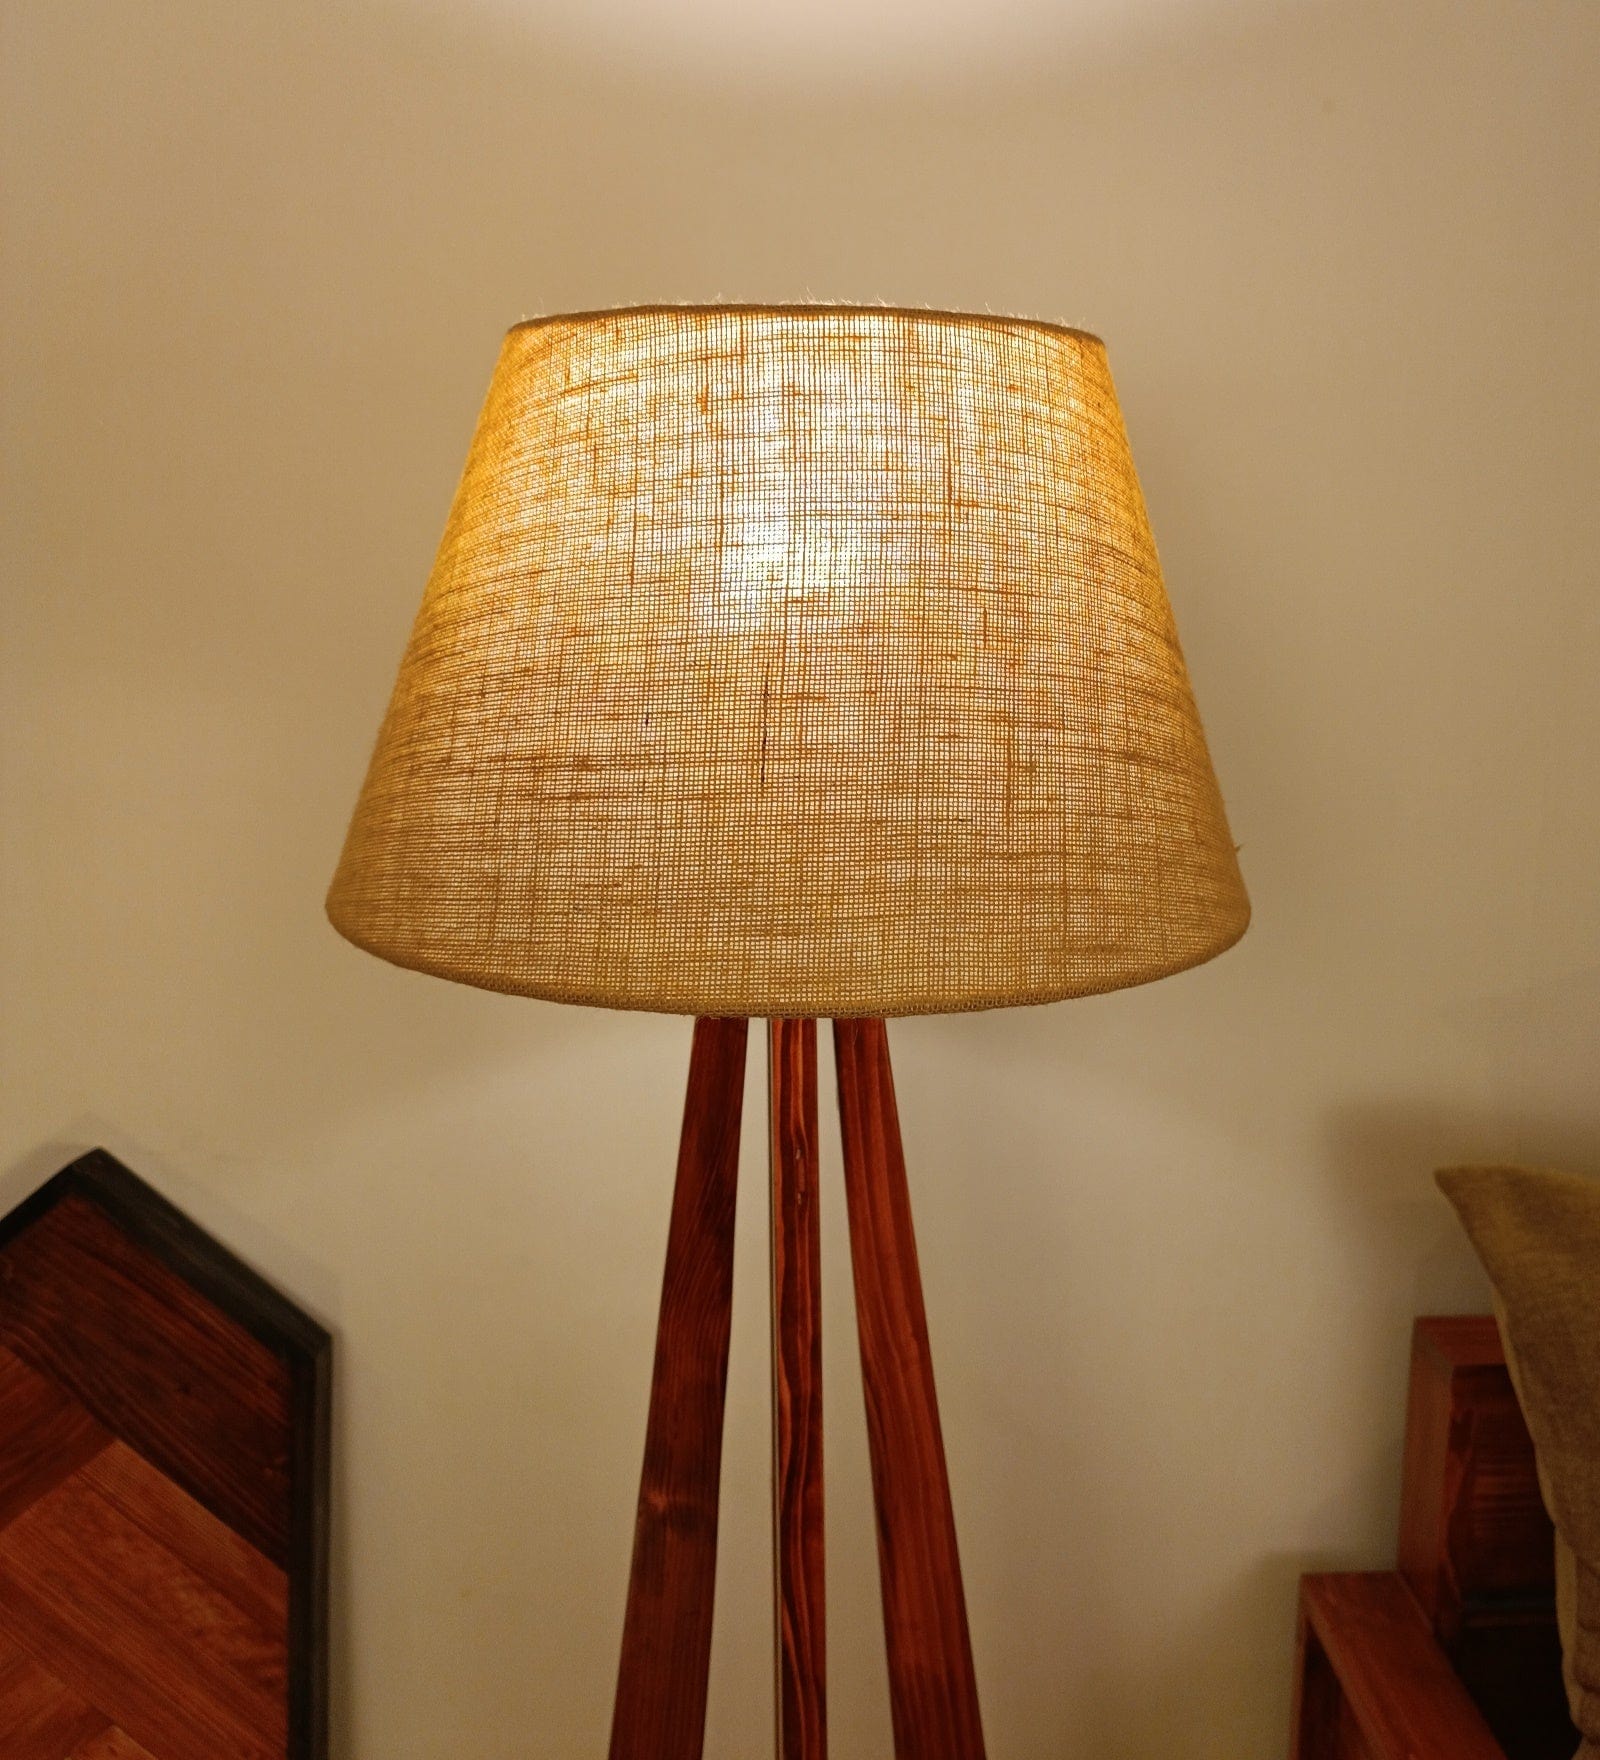 Zoe Wooden Floor Lamp with Brown Base and Jute Fabric Lampshade (BULB NOT INCLUDED)